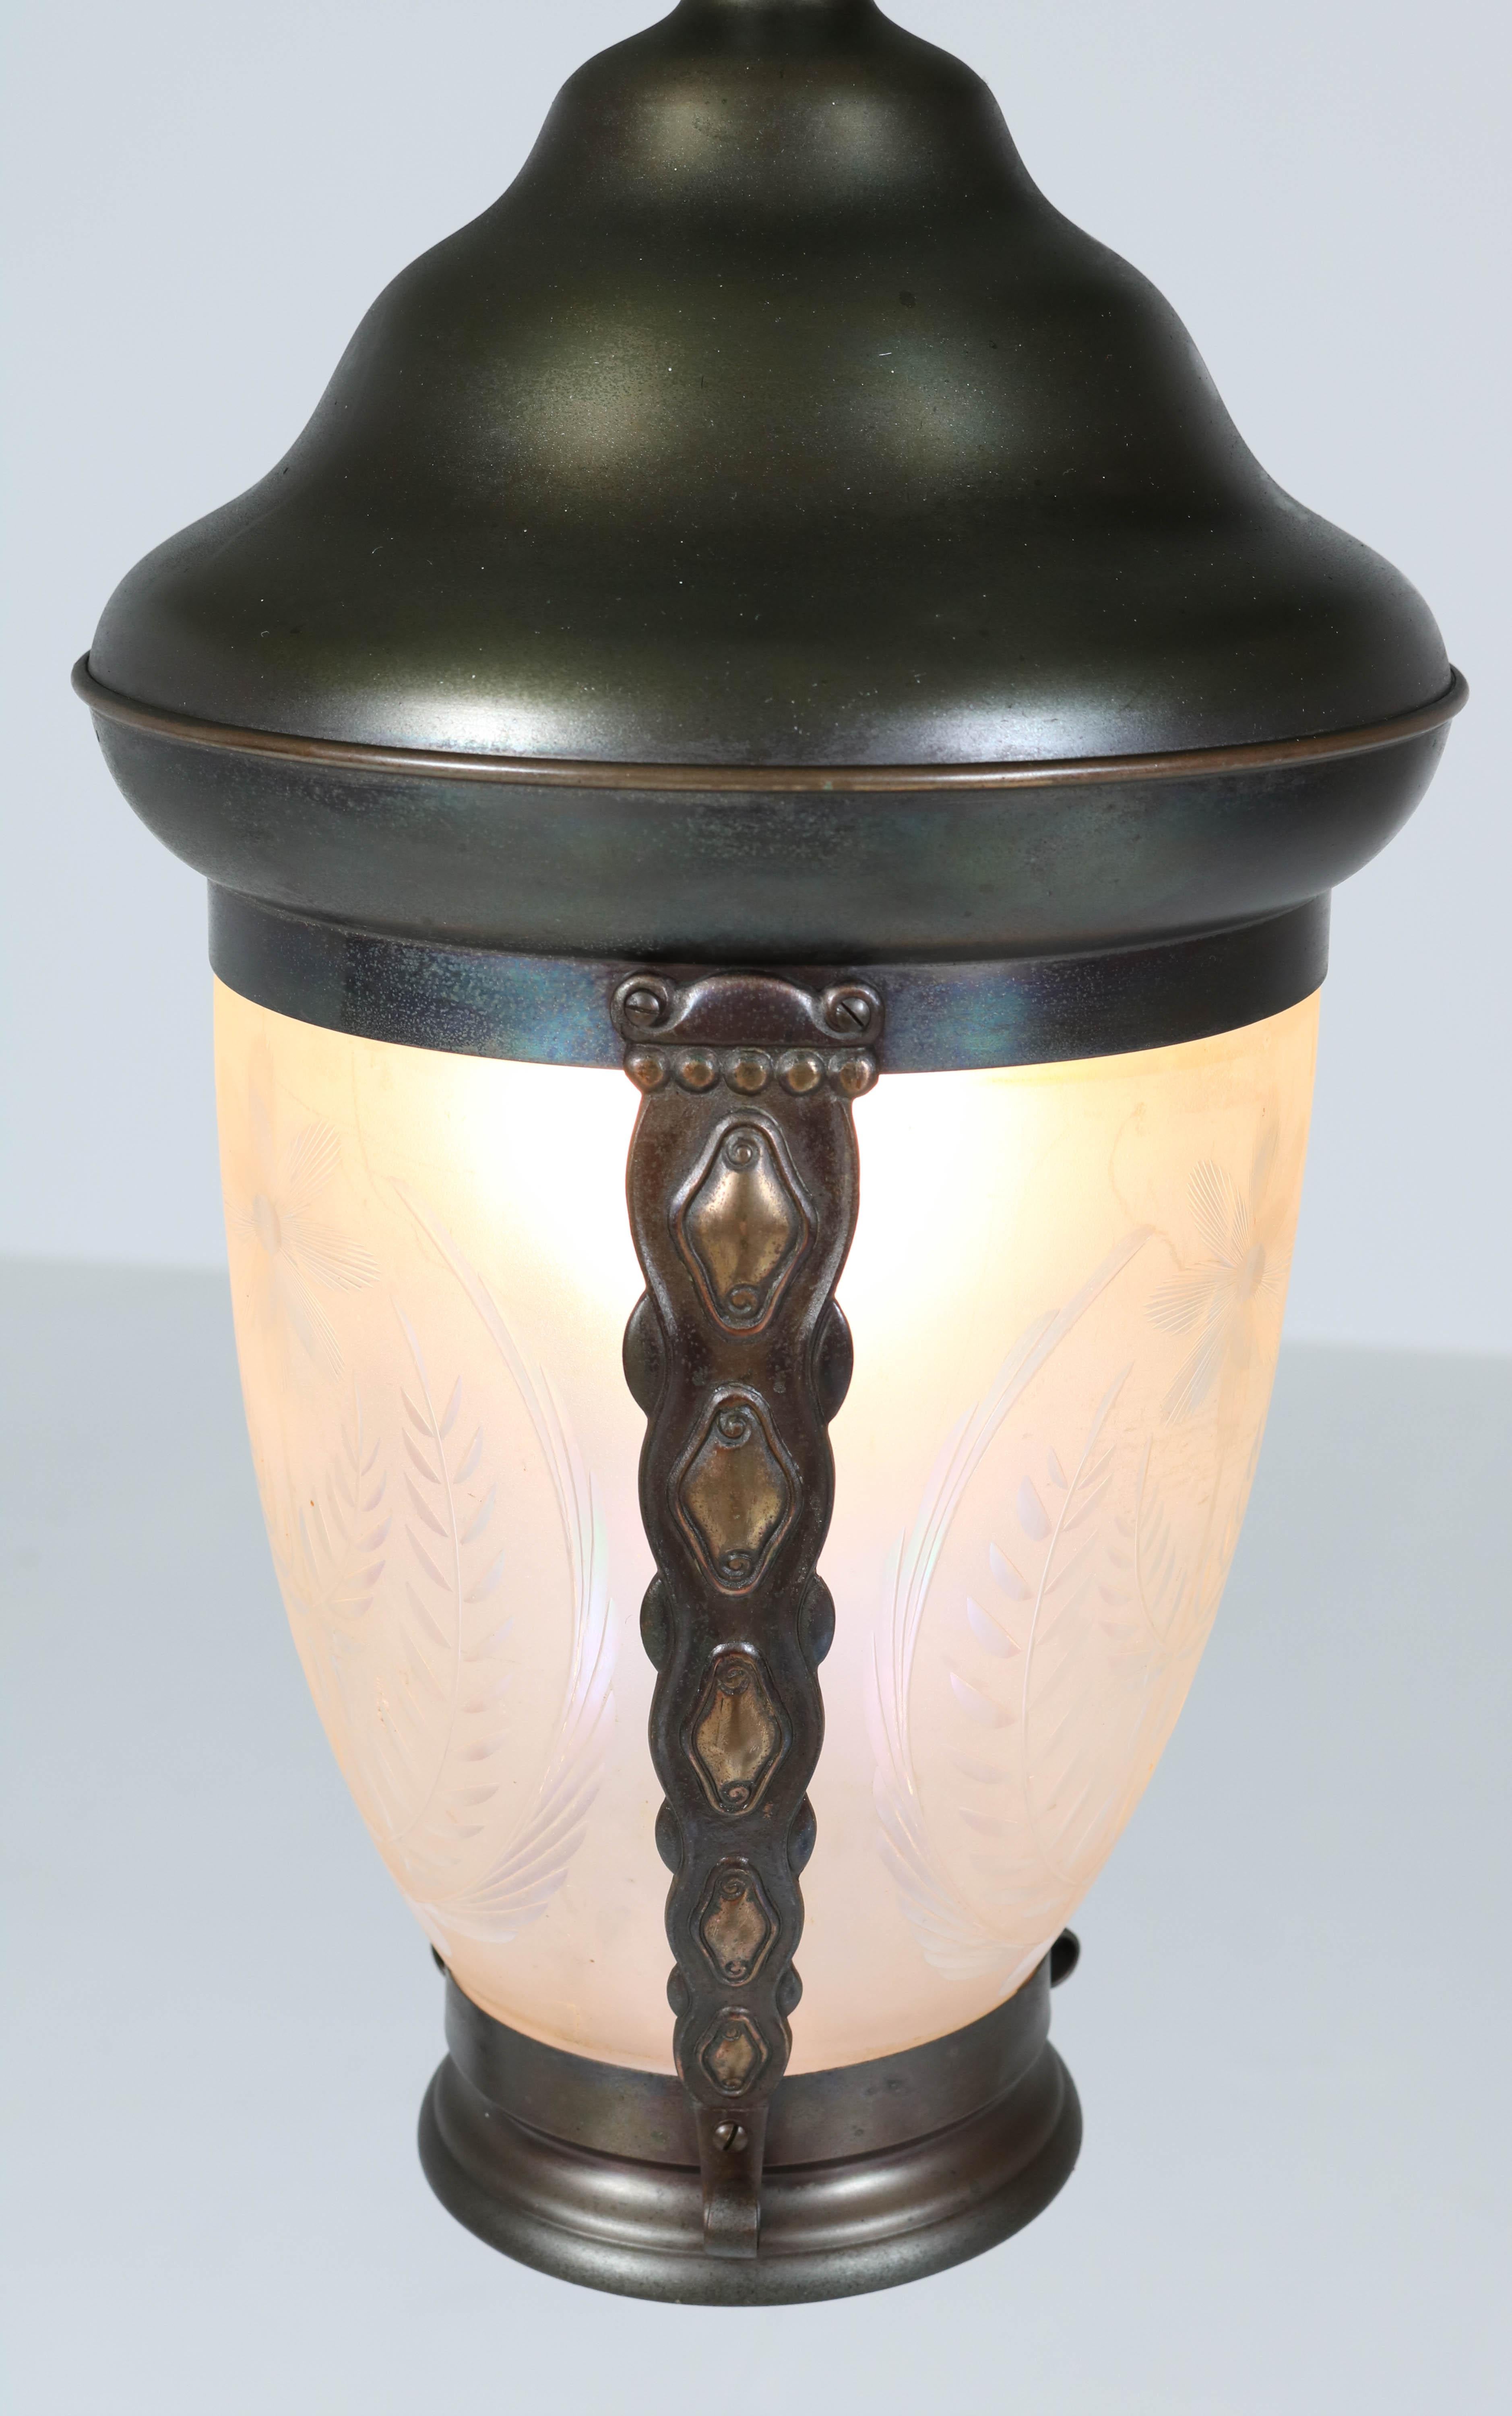 Brass Art Nouveau Lantern or Pendant Lamp with Petrol Glass Shade, 1900s For Sale 5